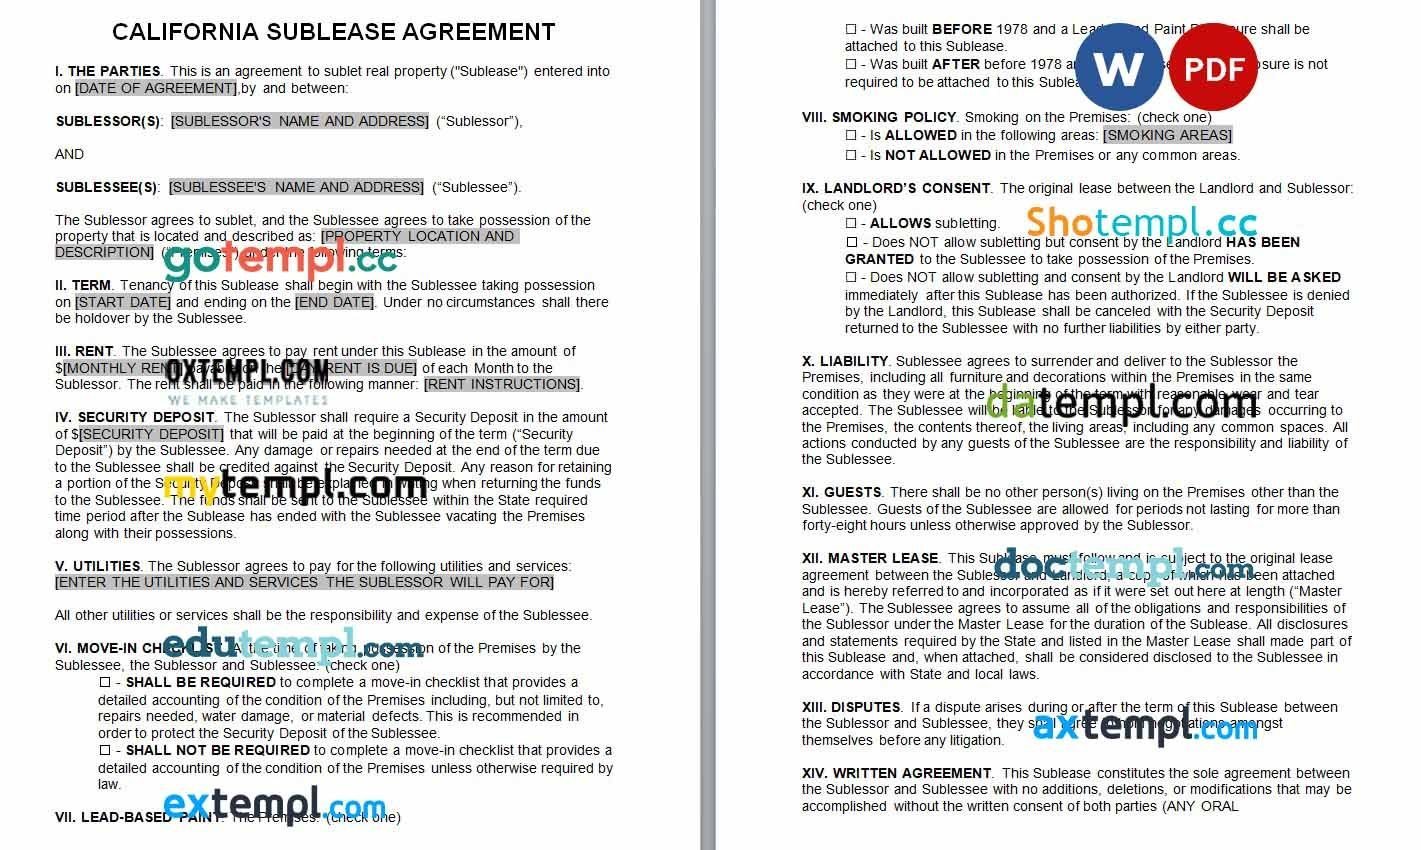 California Sublease Agreement Word example, fully editable